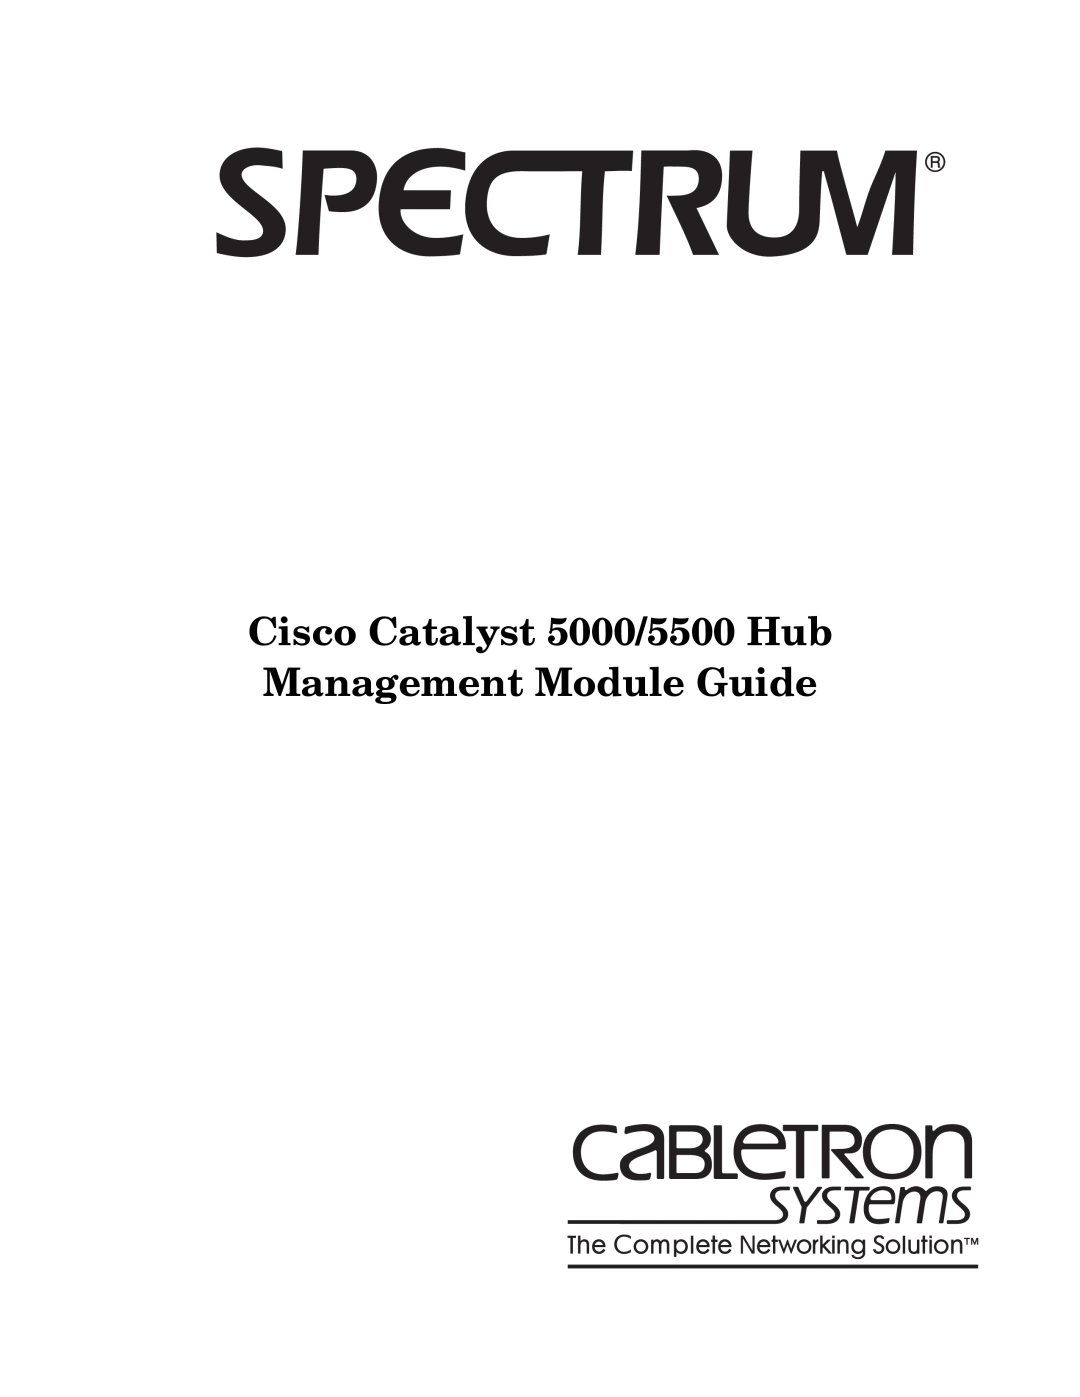 Cabletron Systems 5000, 5500 manual Cisco Catalyst 5000/5500 Hub Management Module Guide 